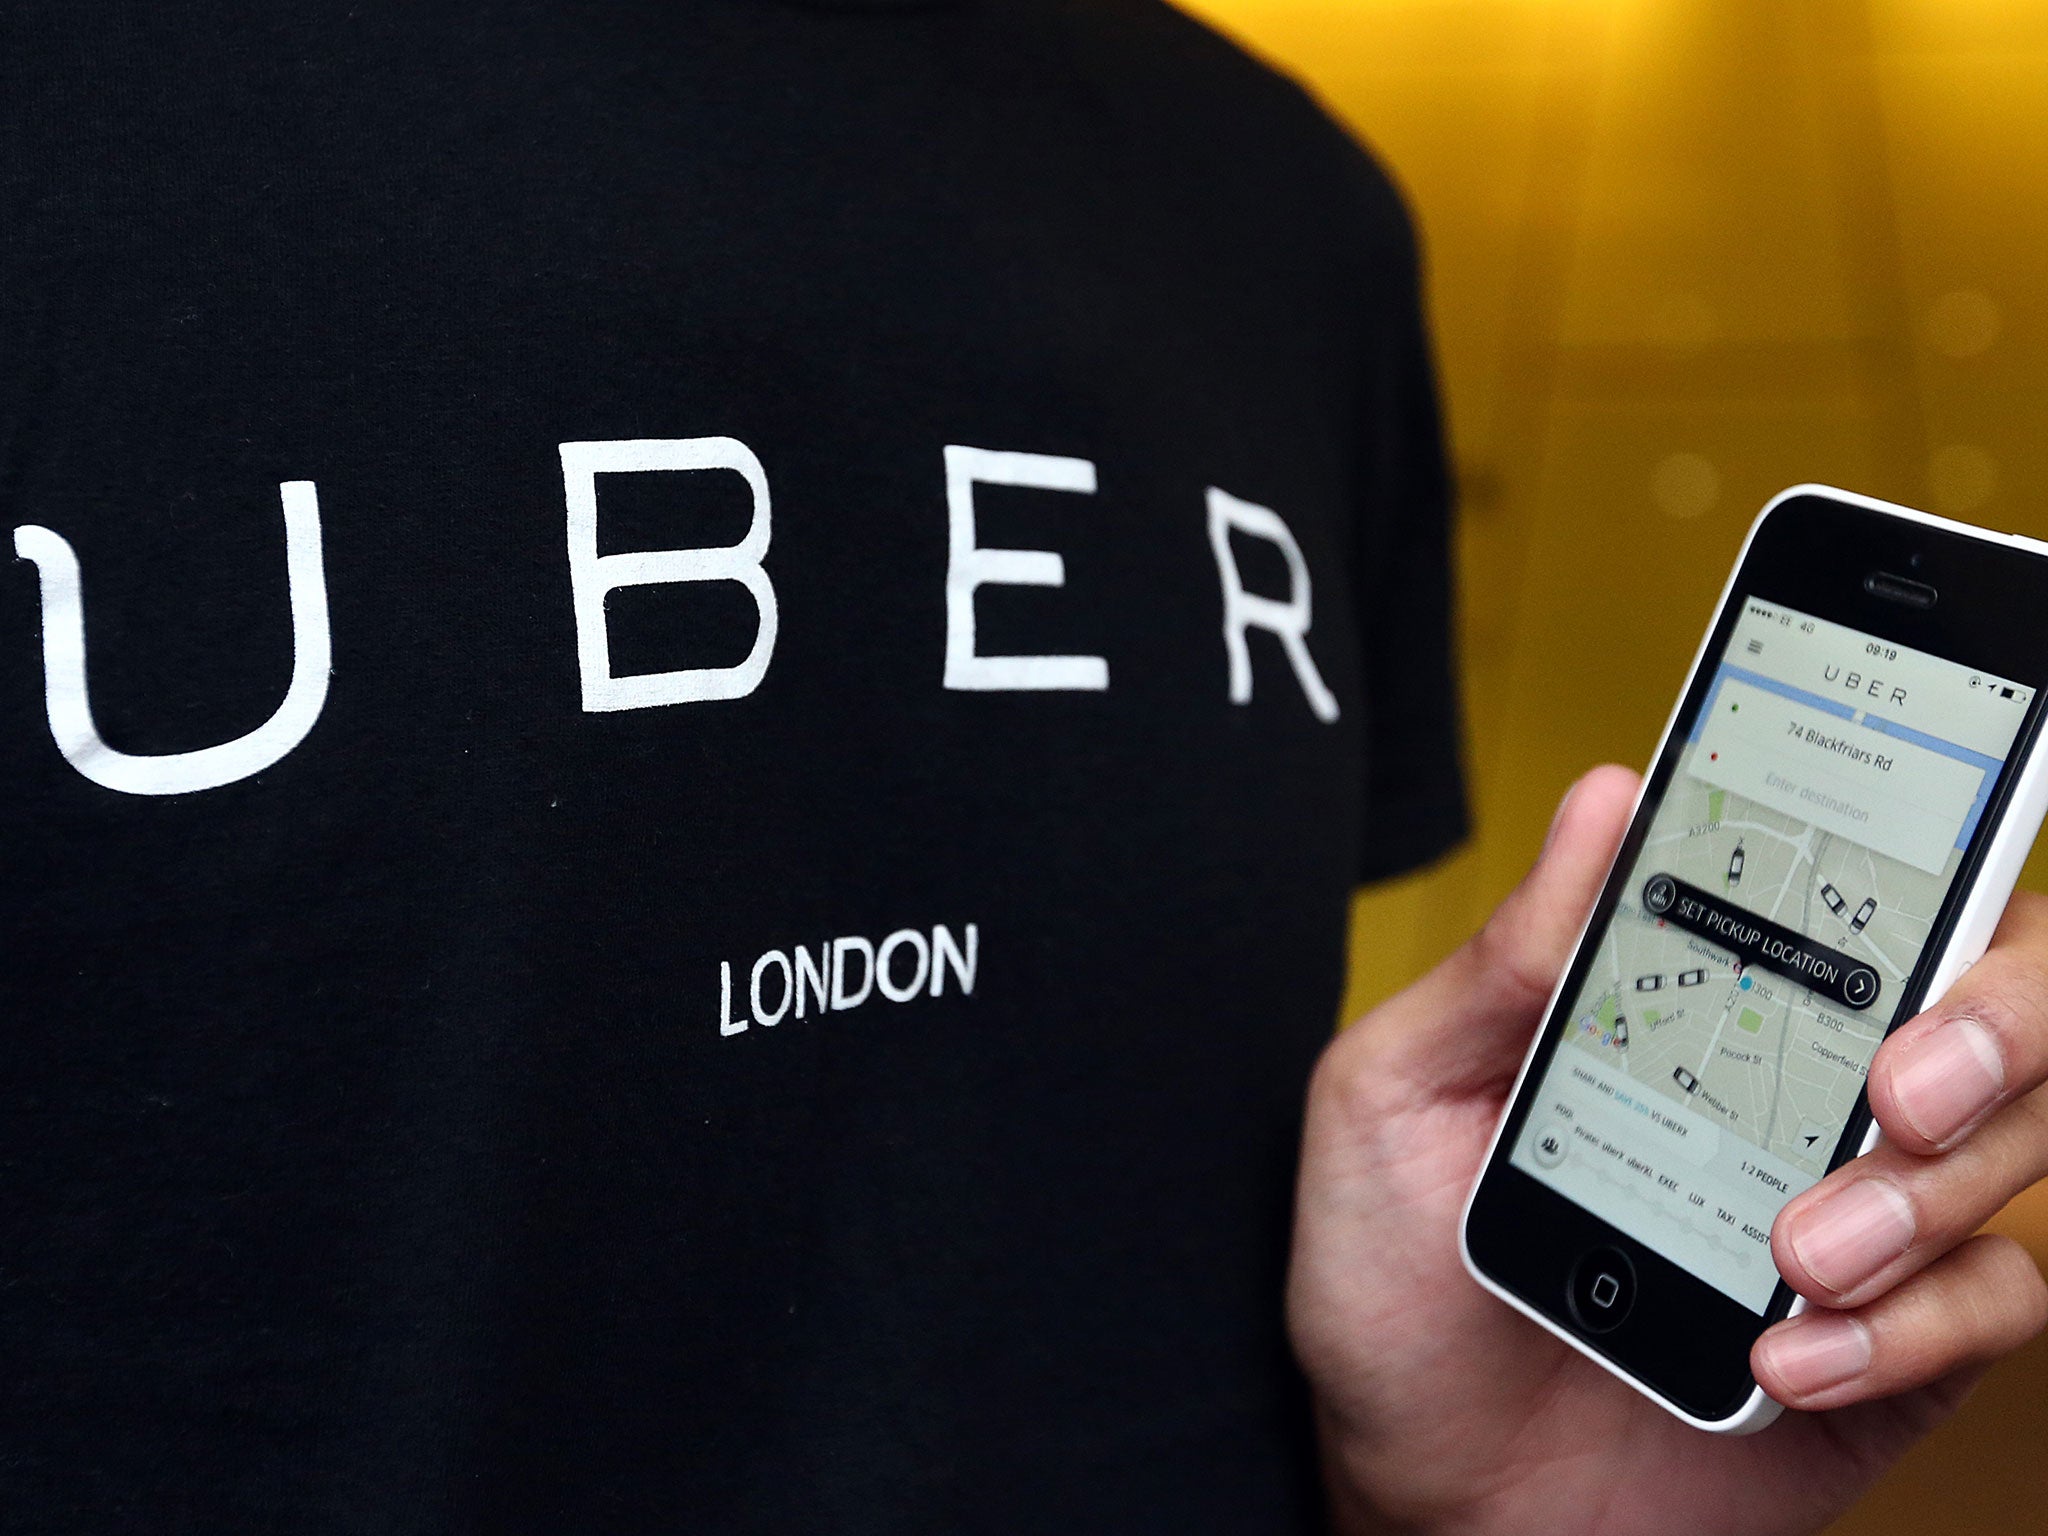 Uber is used by more than 30,000 drivers, labelled as self-employed partners across the UK in 15 towns and cities, with more than 1.5 million regular passengers in London